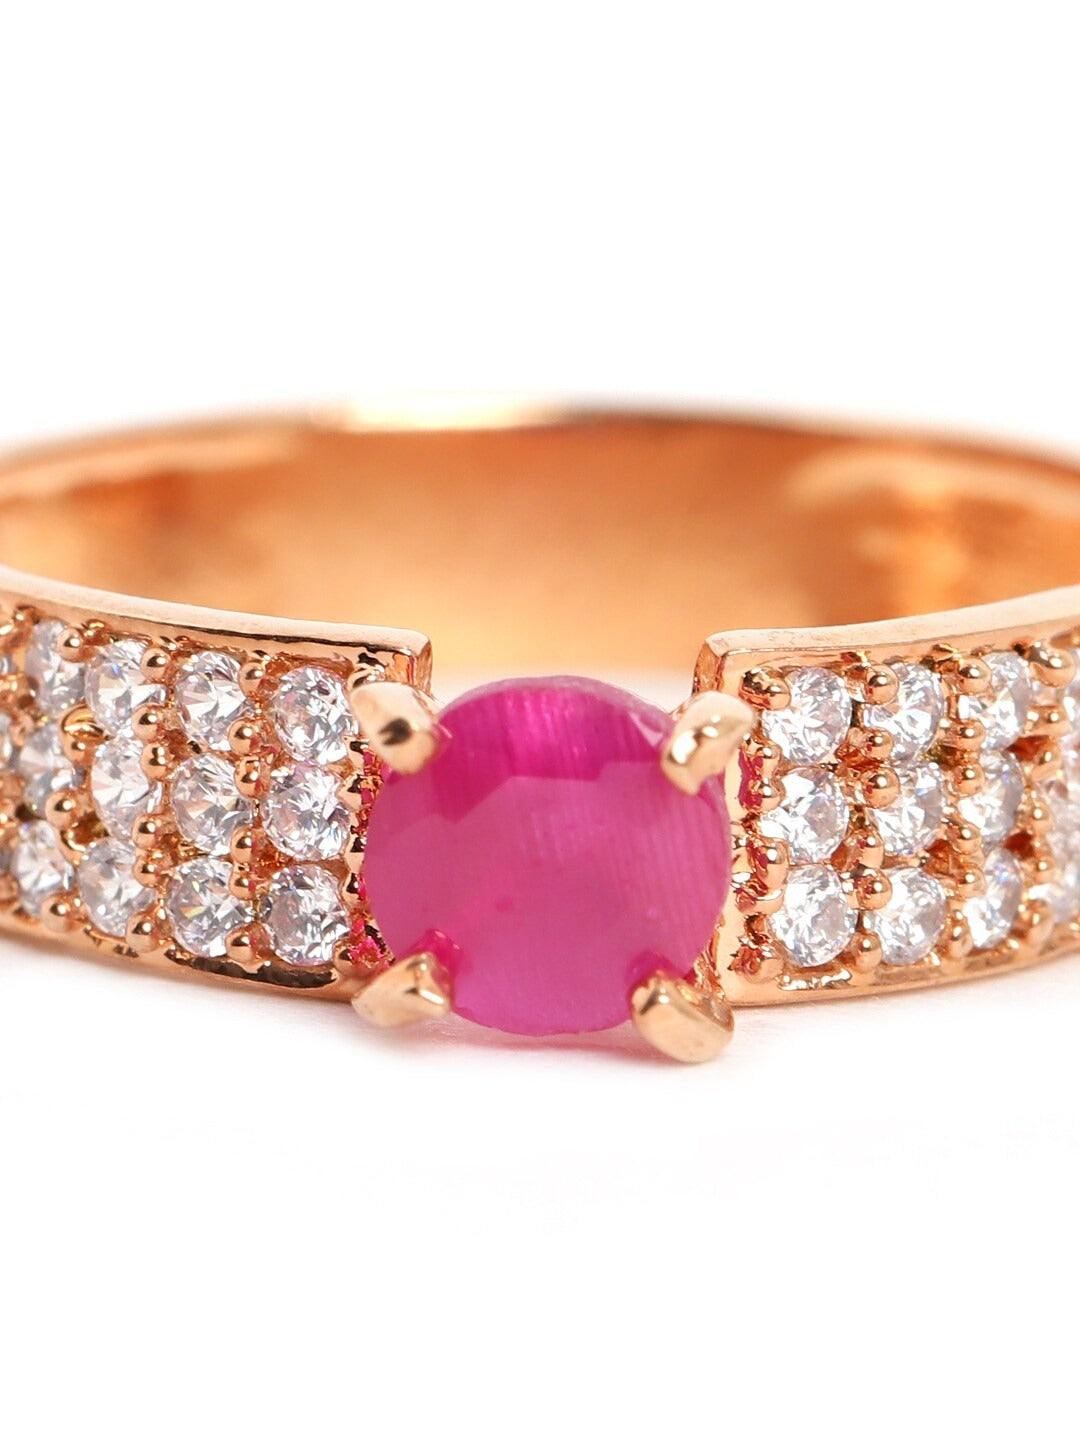 Buy Ruby Manik Ring With Copper Metal Finger Ring Online at Best Prices in  India - JioMart.